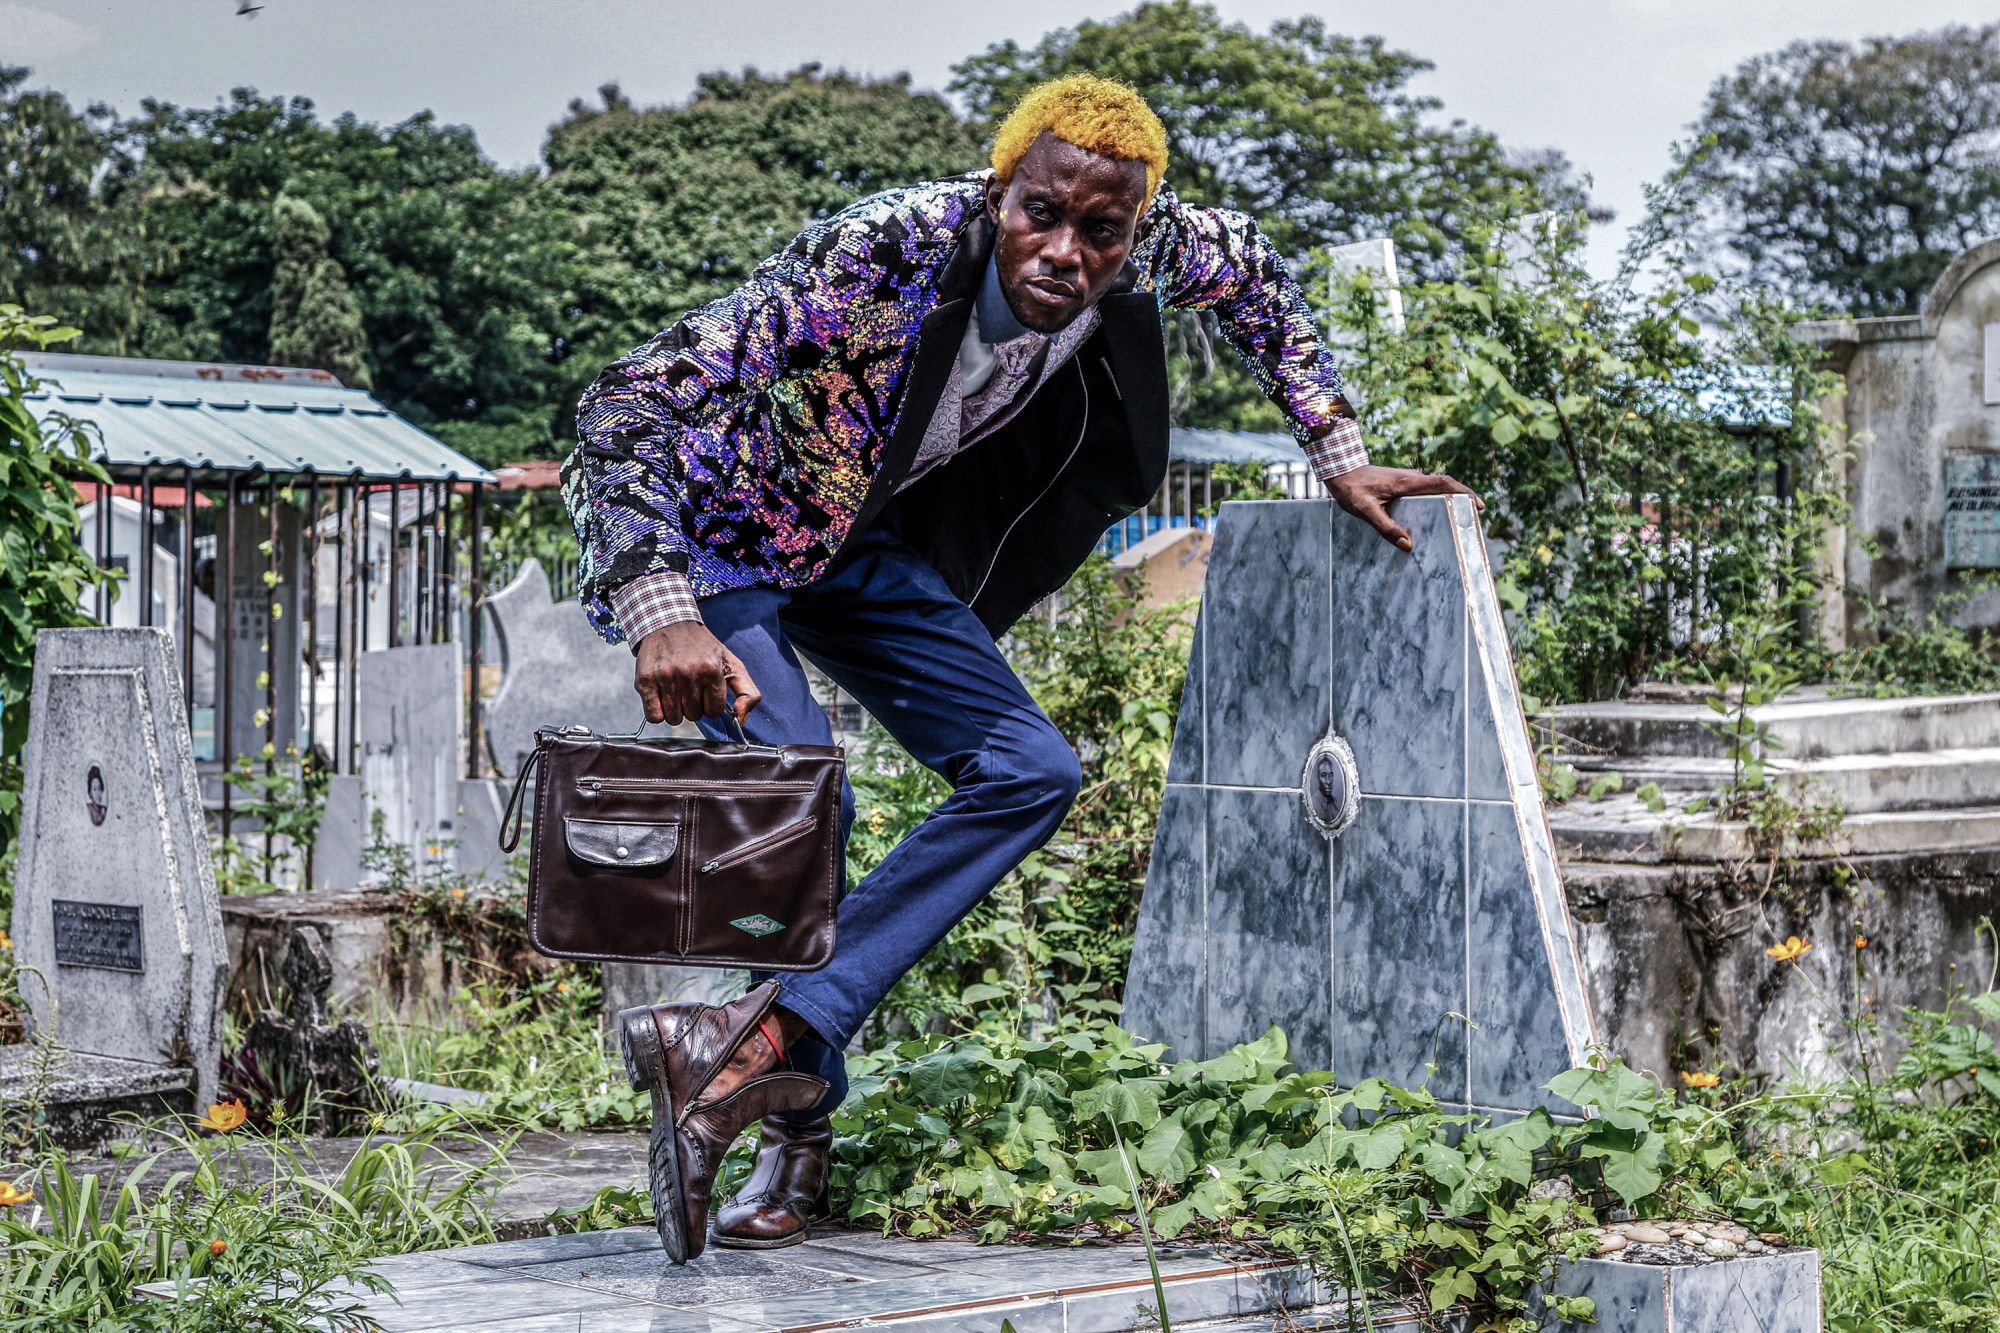 Kinshasa, DRC, February 2021. Gael Basaula, who goes by the name “Nyarukos ba Forme”, poses atop a grave in the cemetery in the Gombe neighbourhood. © Justin Makangara for Fondation Carmignac